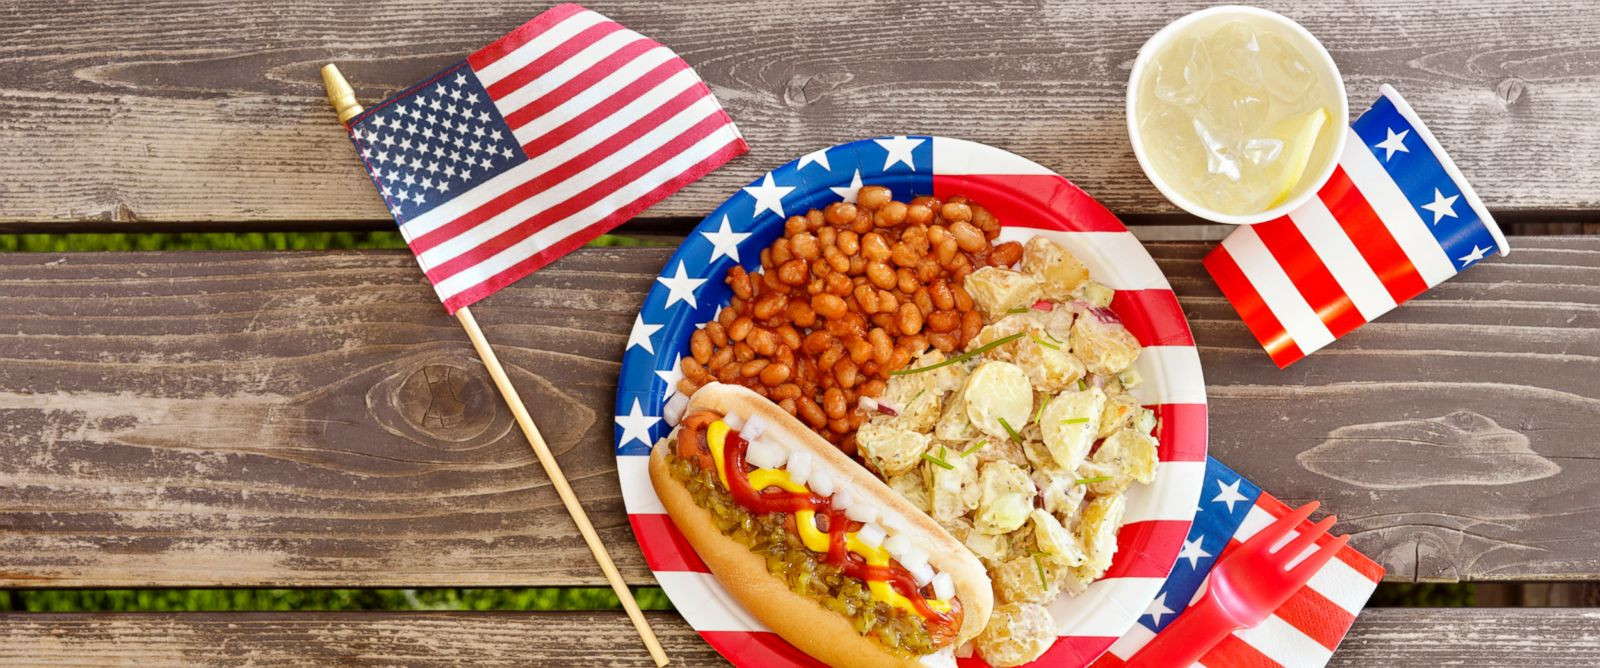 Free Food Memorial Day
 A few precautions could help keep your Memorial Day